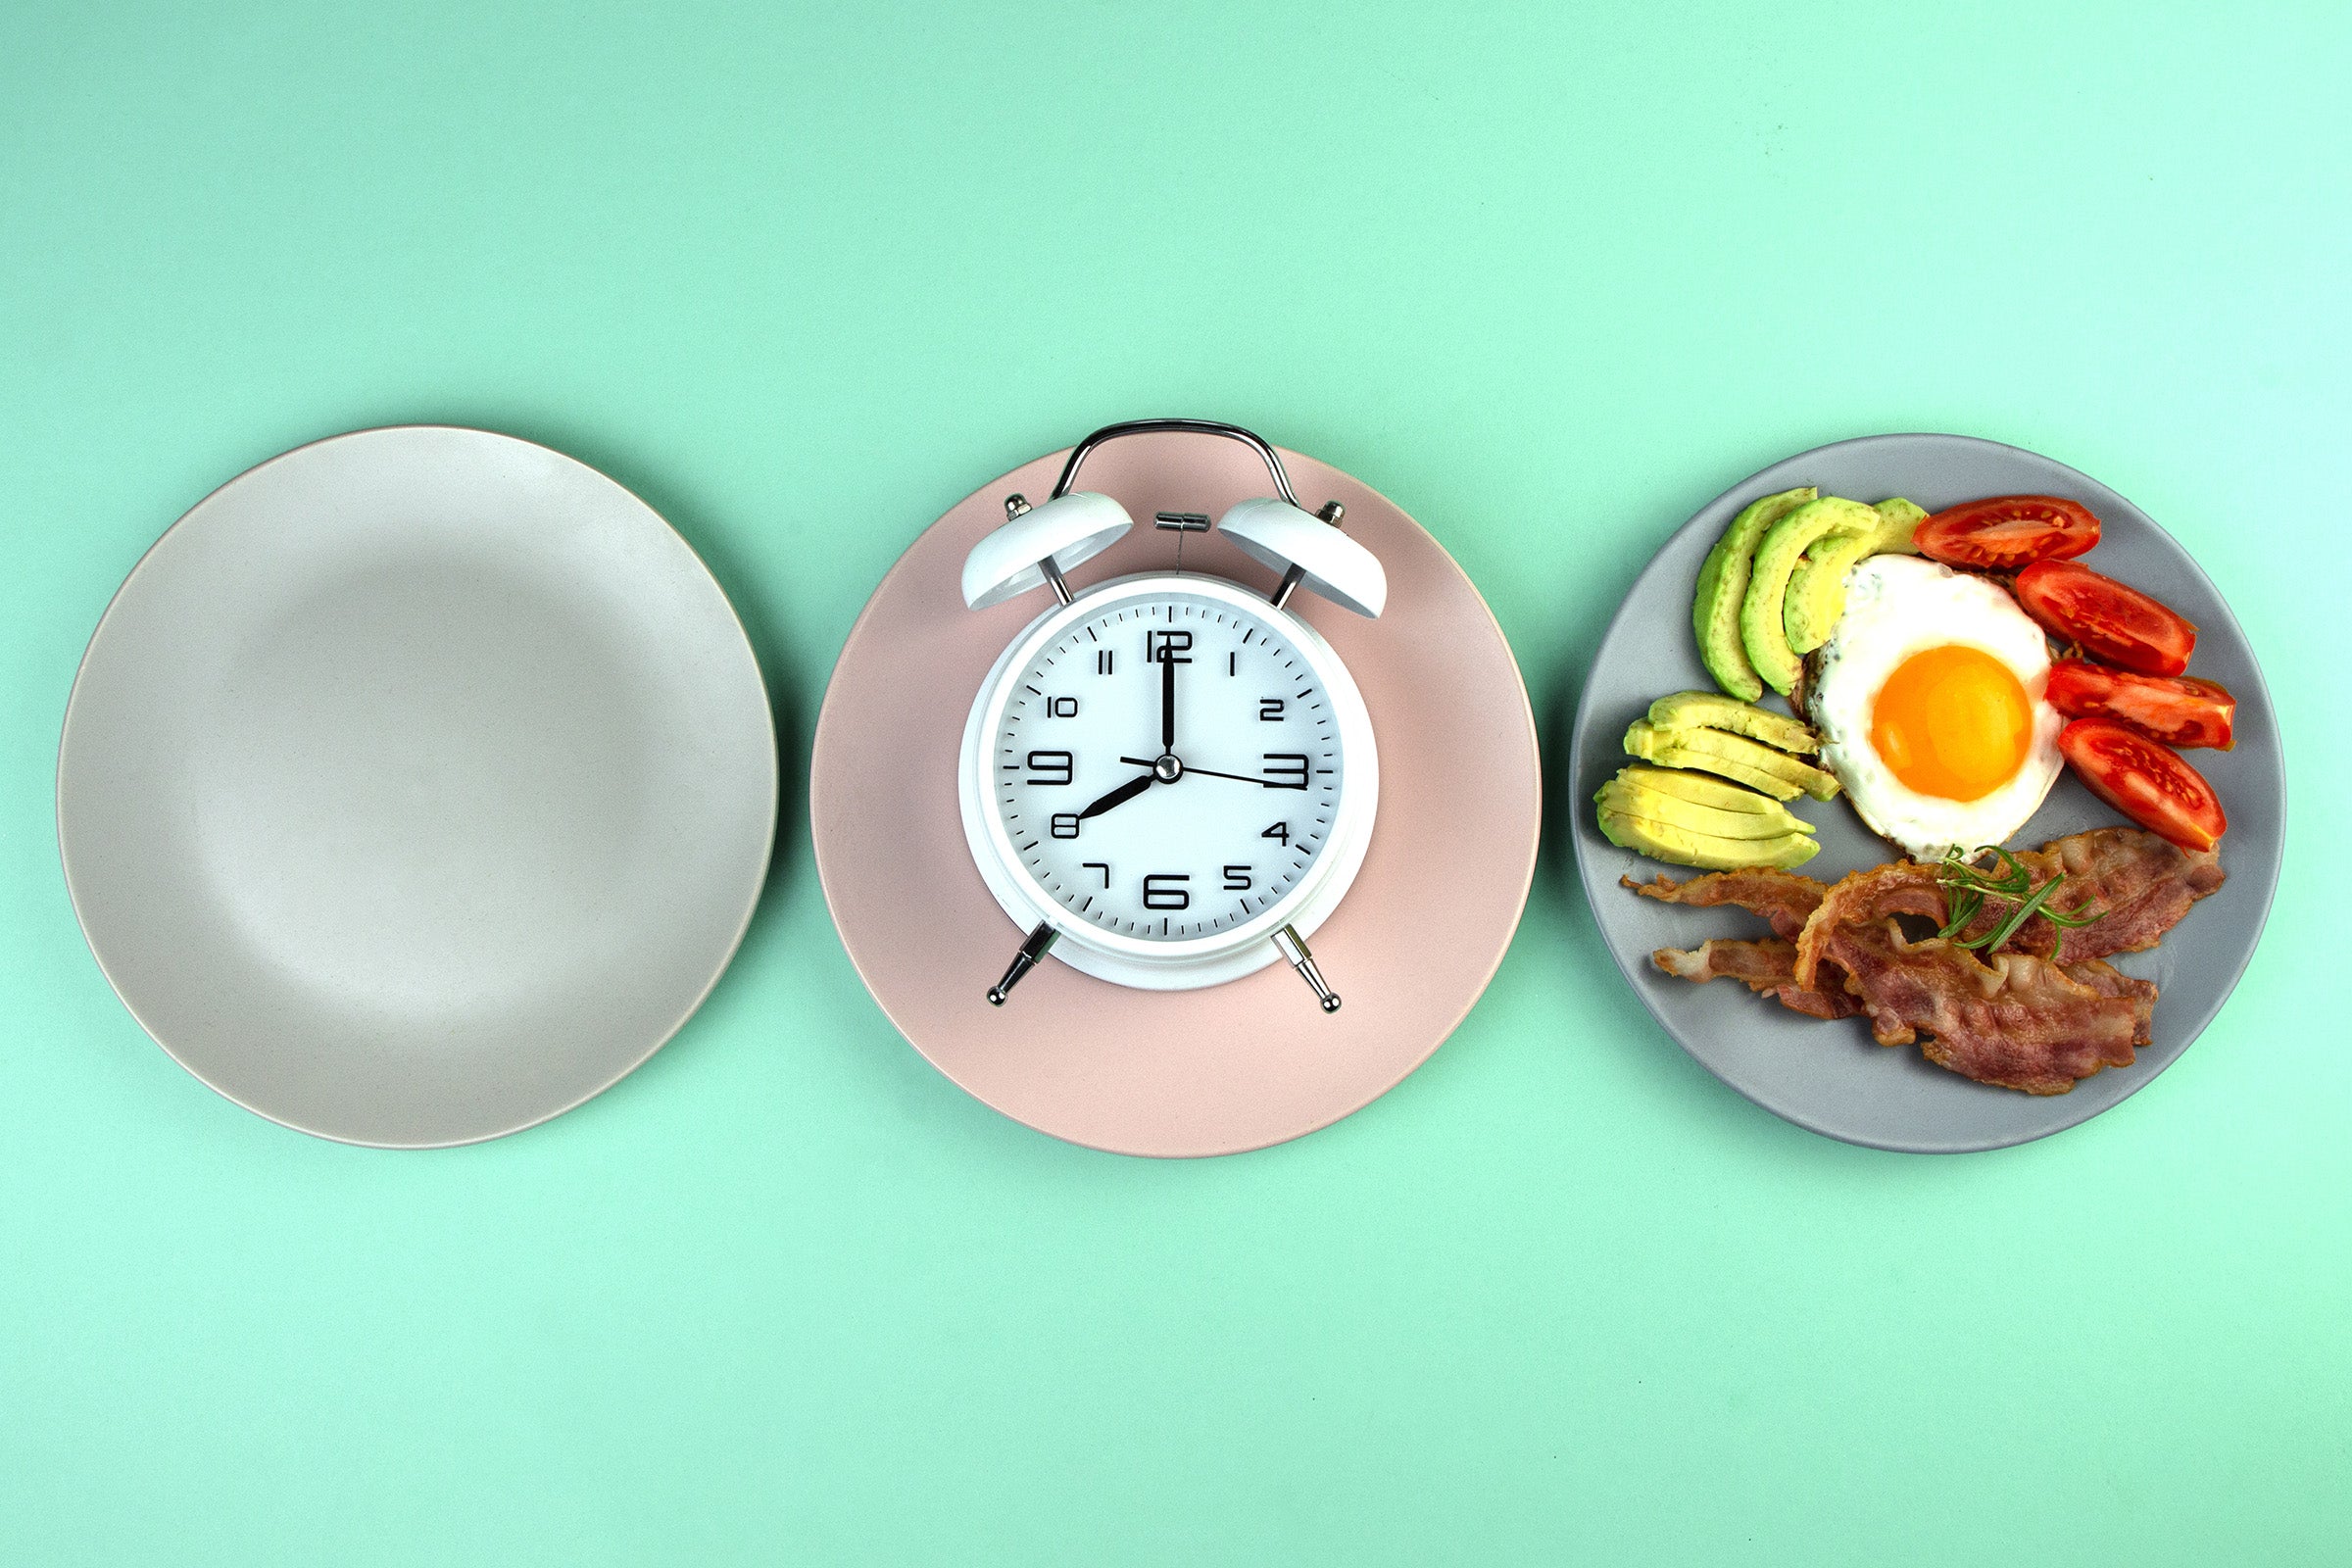 Intermittent fasting refers to the practice of selectively fasting from food, and, with this process, intermittent fasting may be able to help your body get into ketosis faster by helping to eliminate glucose from your body.